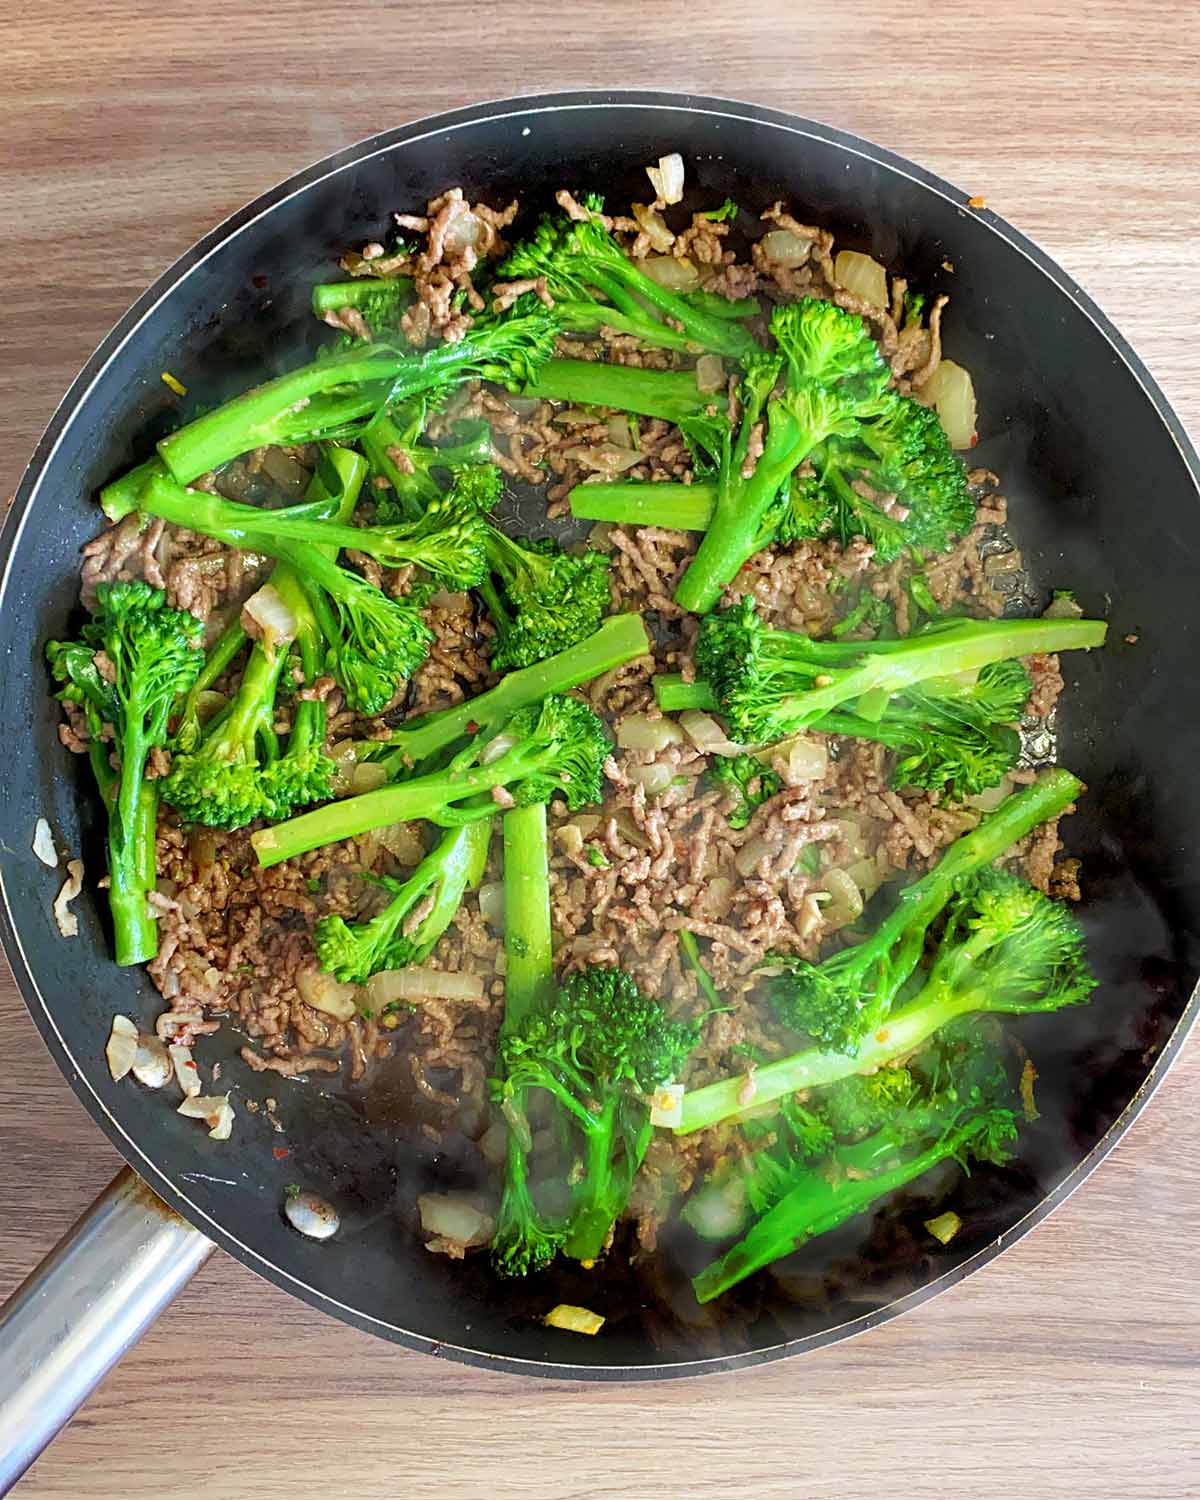 Sauce added and tenderstem broccoli added to the pan.